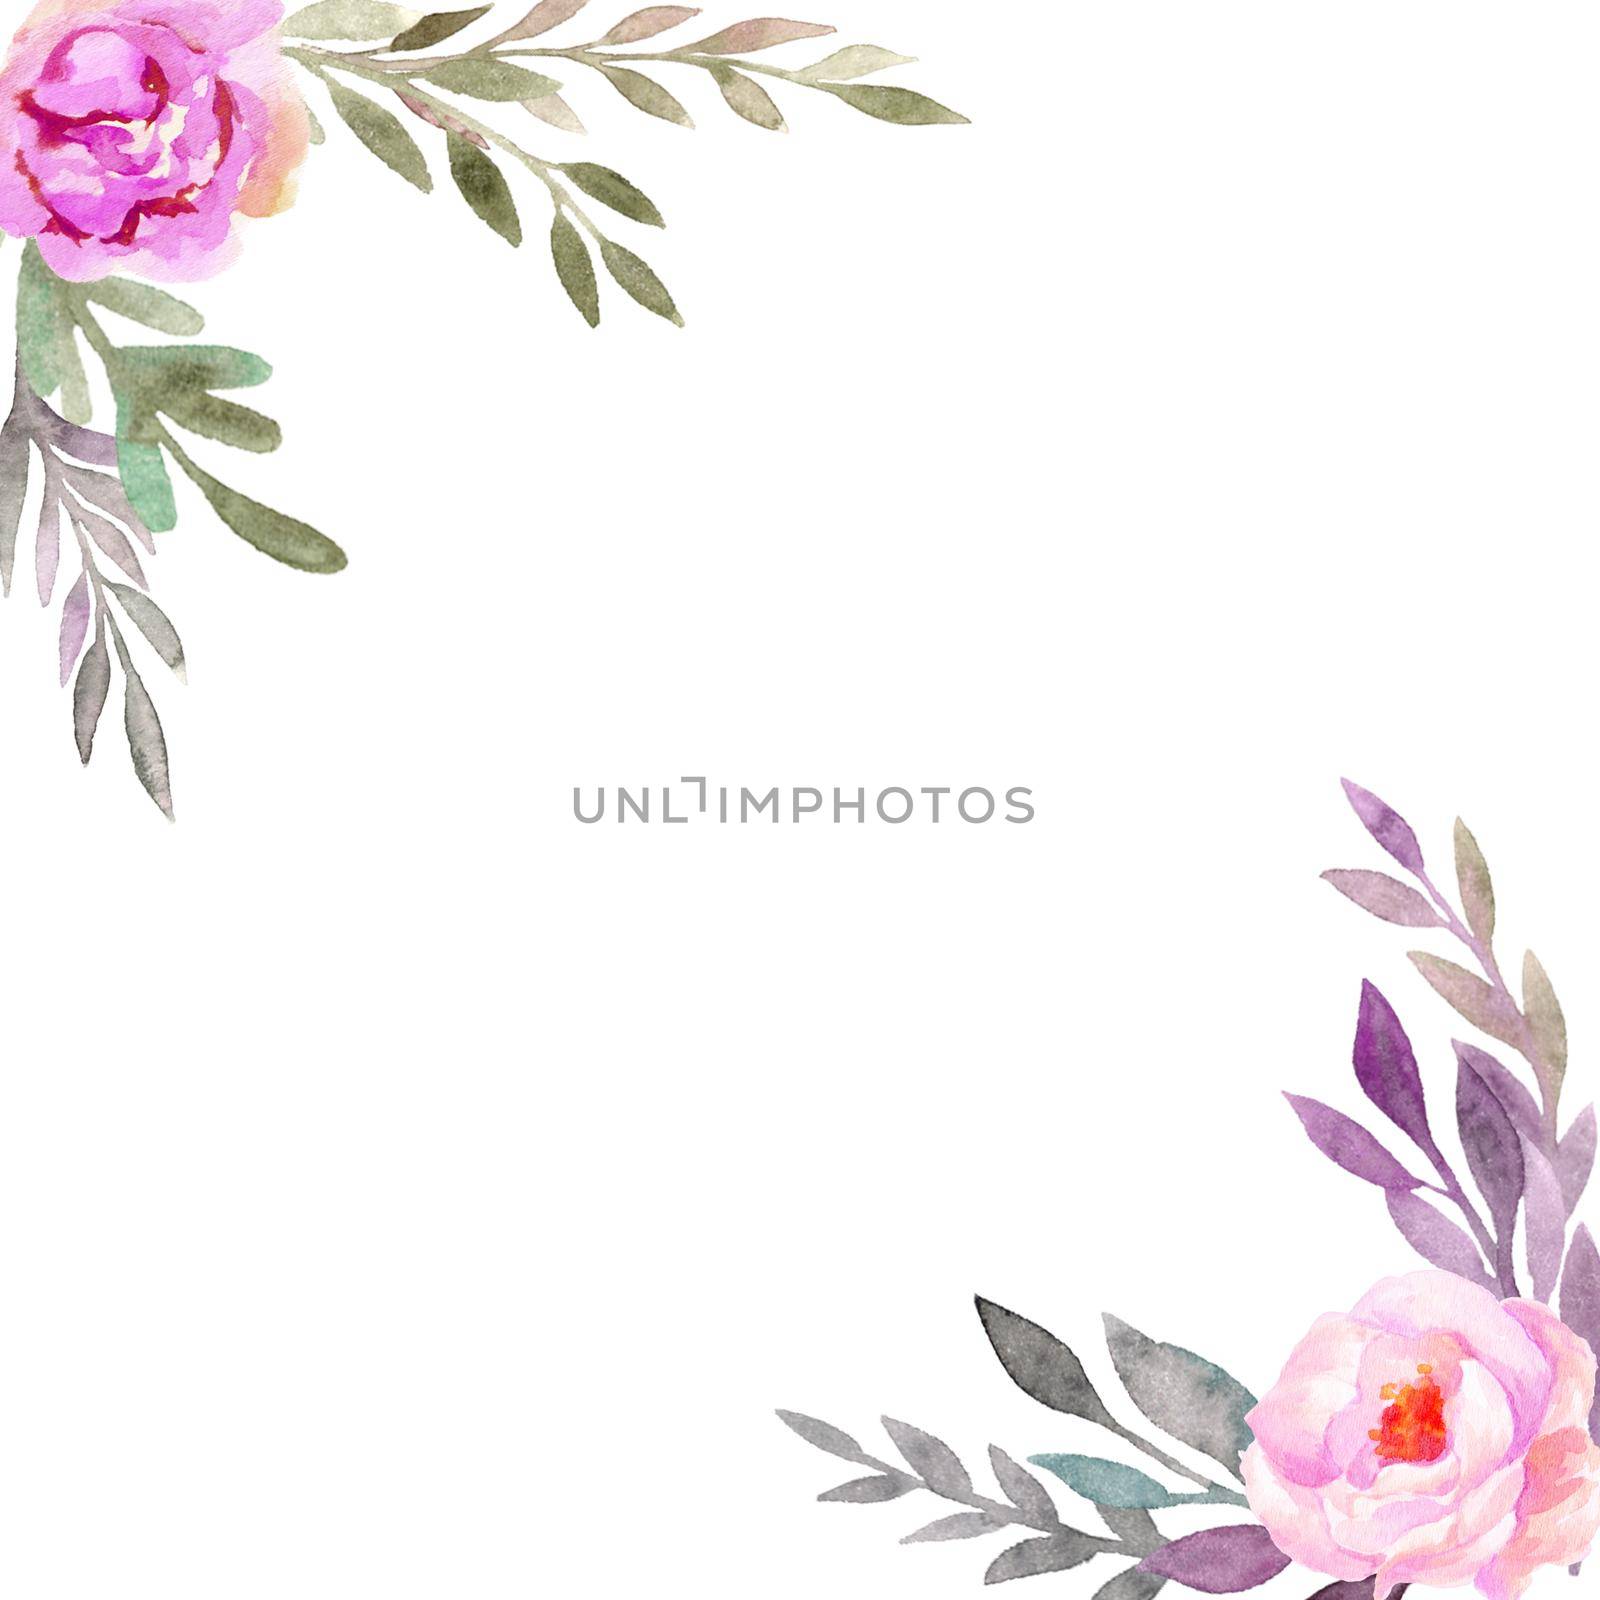 watercolor flower frame backgrounds. wreath of flowers in watercolor style with white background, illustration by ANITA